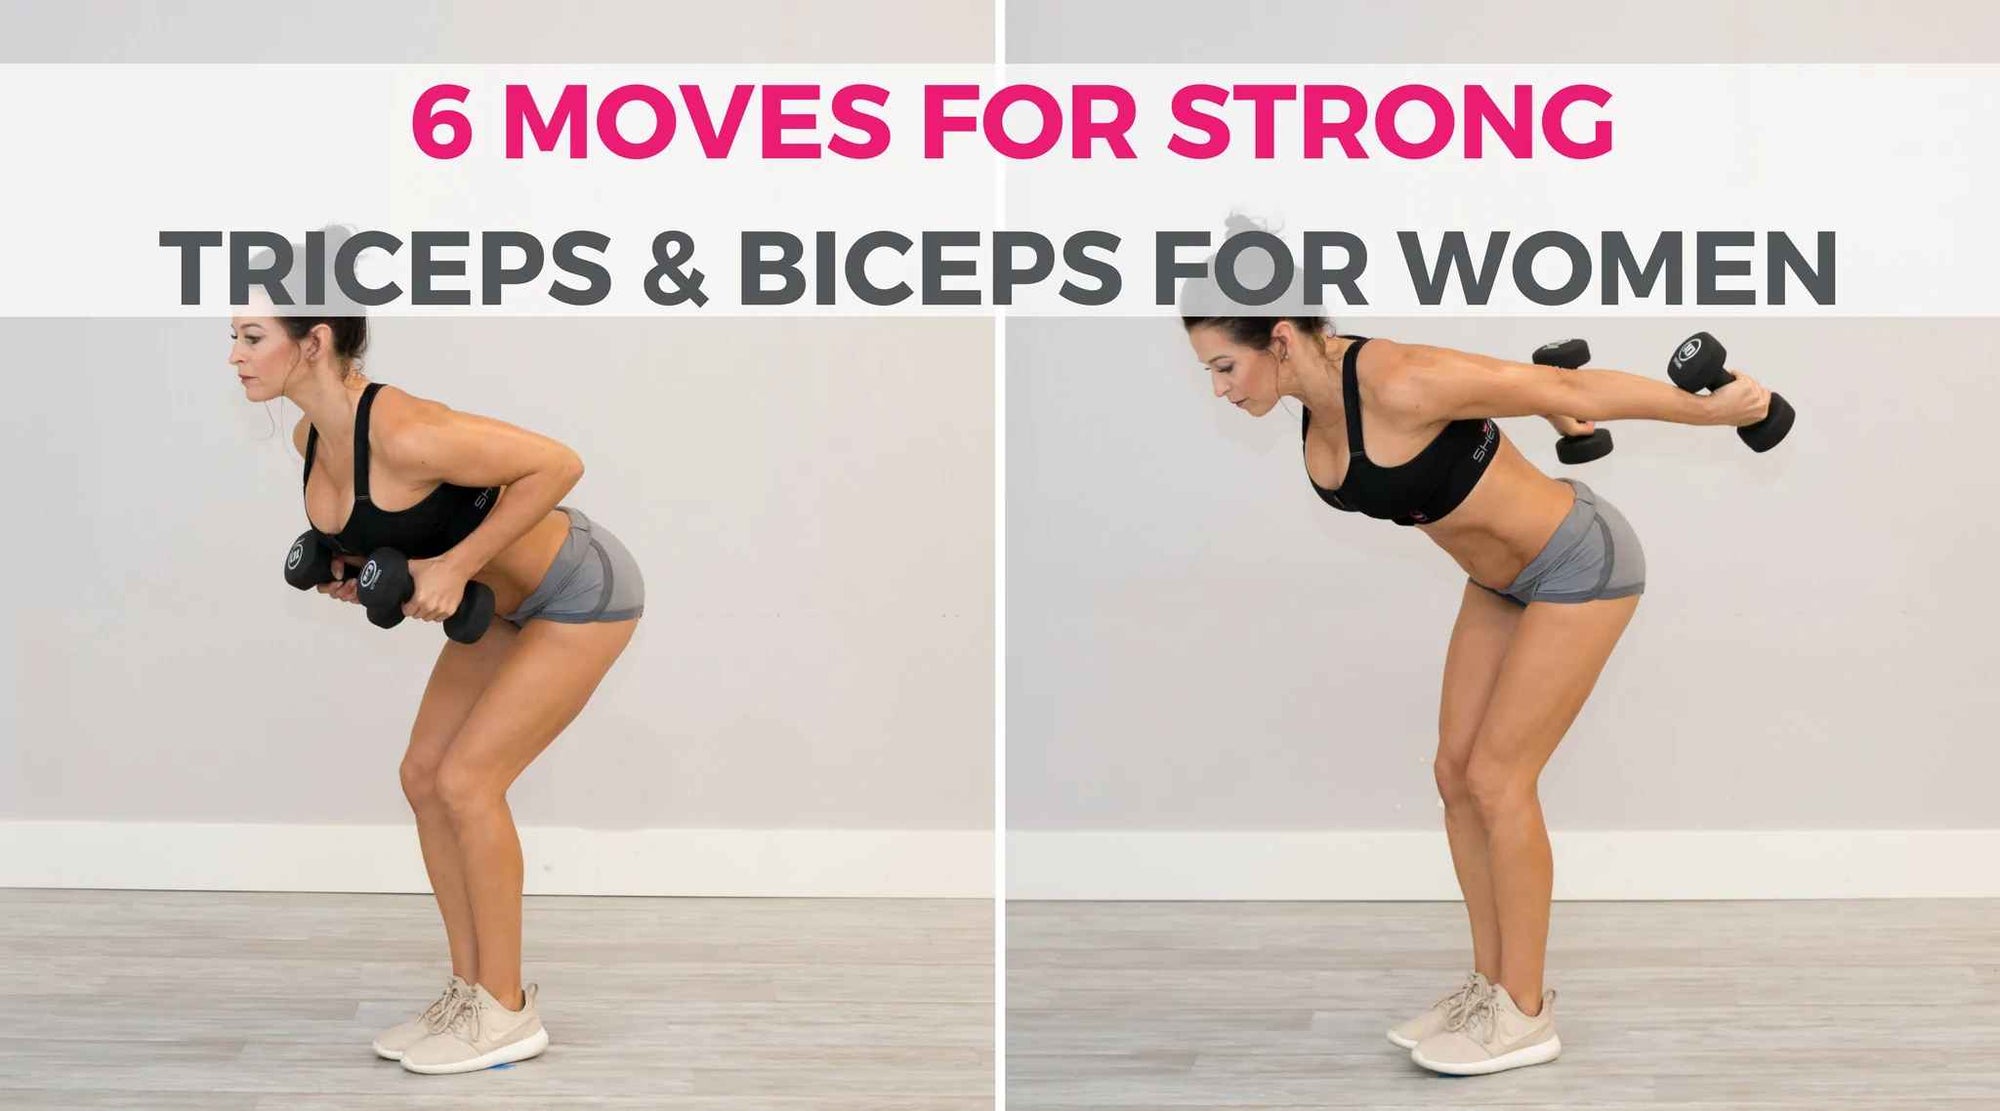 The Ultimate Upper Body Workout for Women: Triceps & Biceps | grab your dumbbells, hit the gym or find a space at home and follow these 6 exercises below to get those strong, toned arms you’re after! 